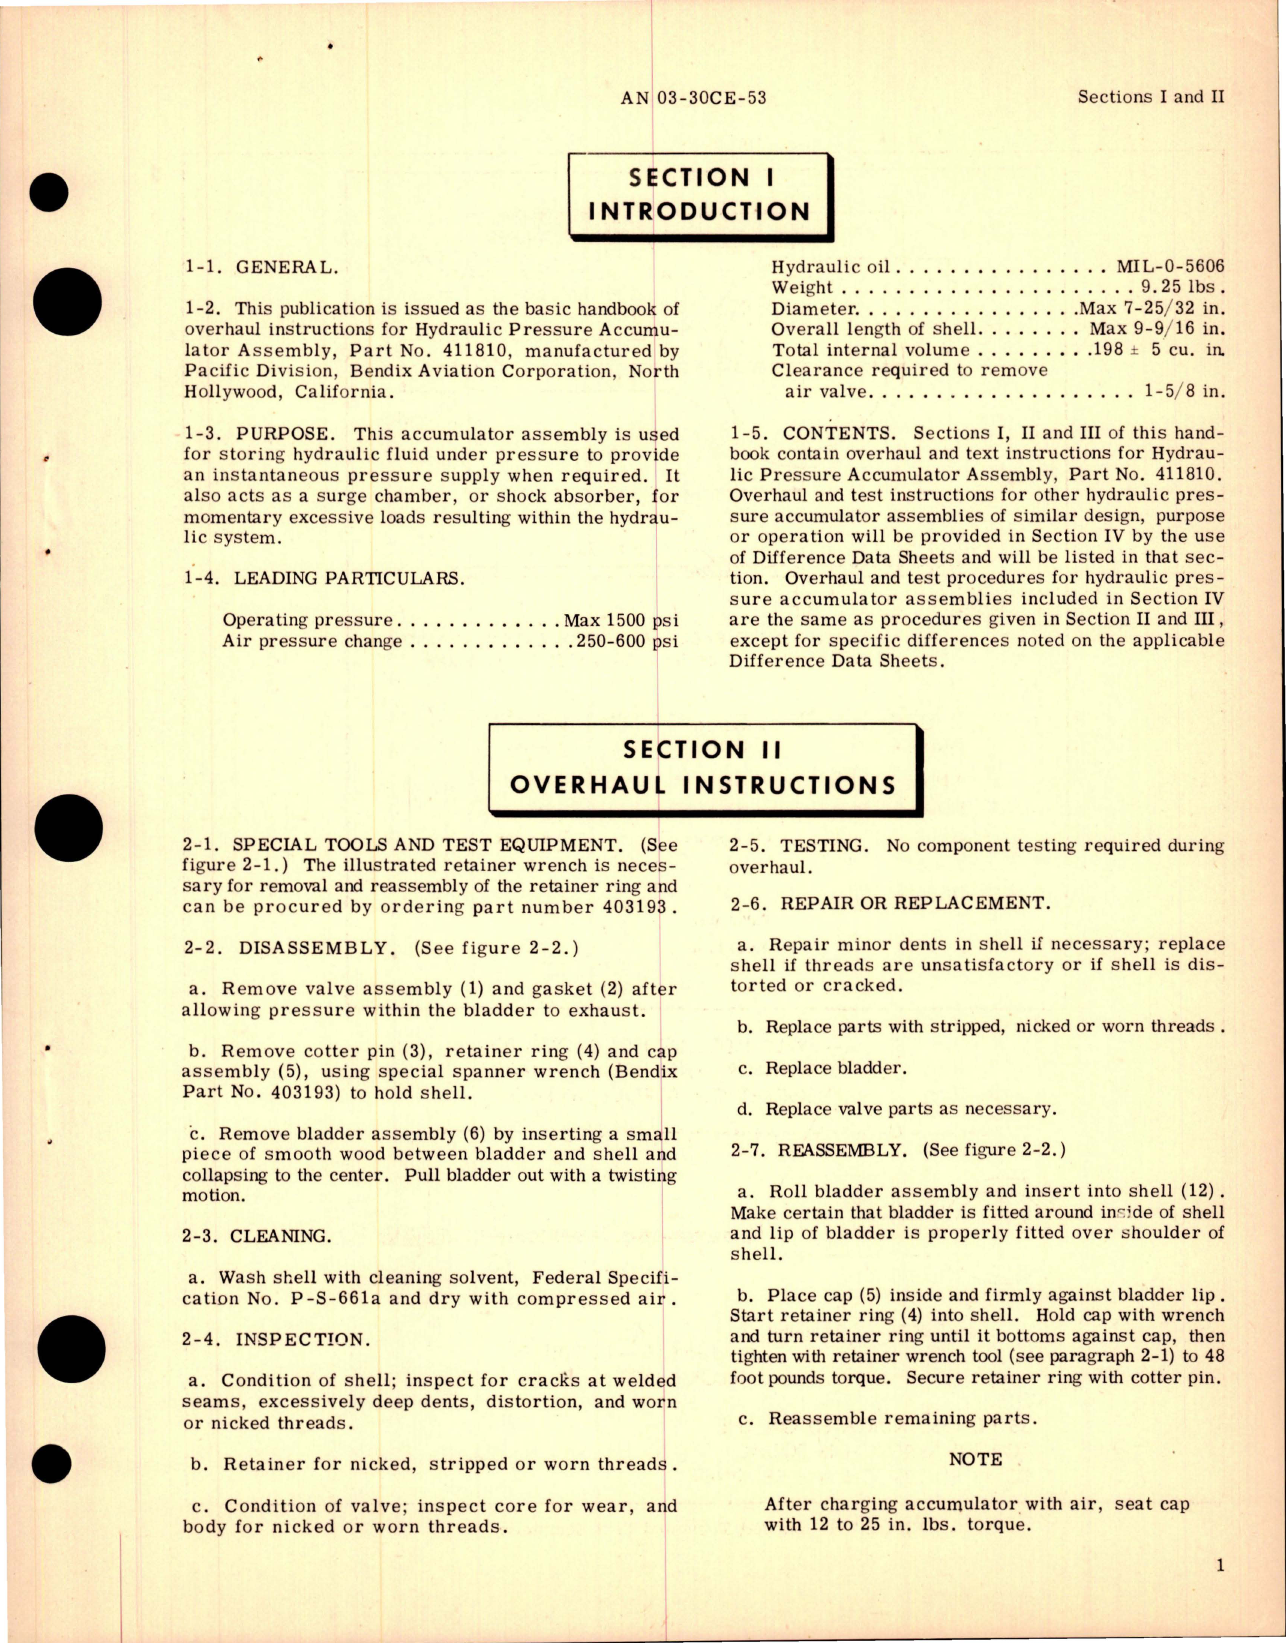 Sample page 5 from AirCorps Library document: Overhaul Instructions for Hydraulic Pressure Accumulators - Parts 411810 and 411950